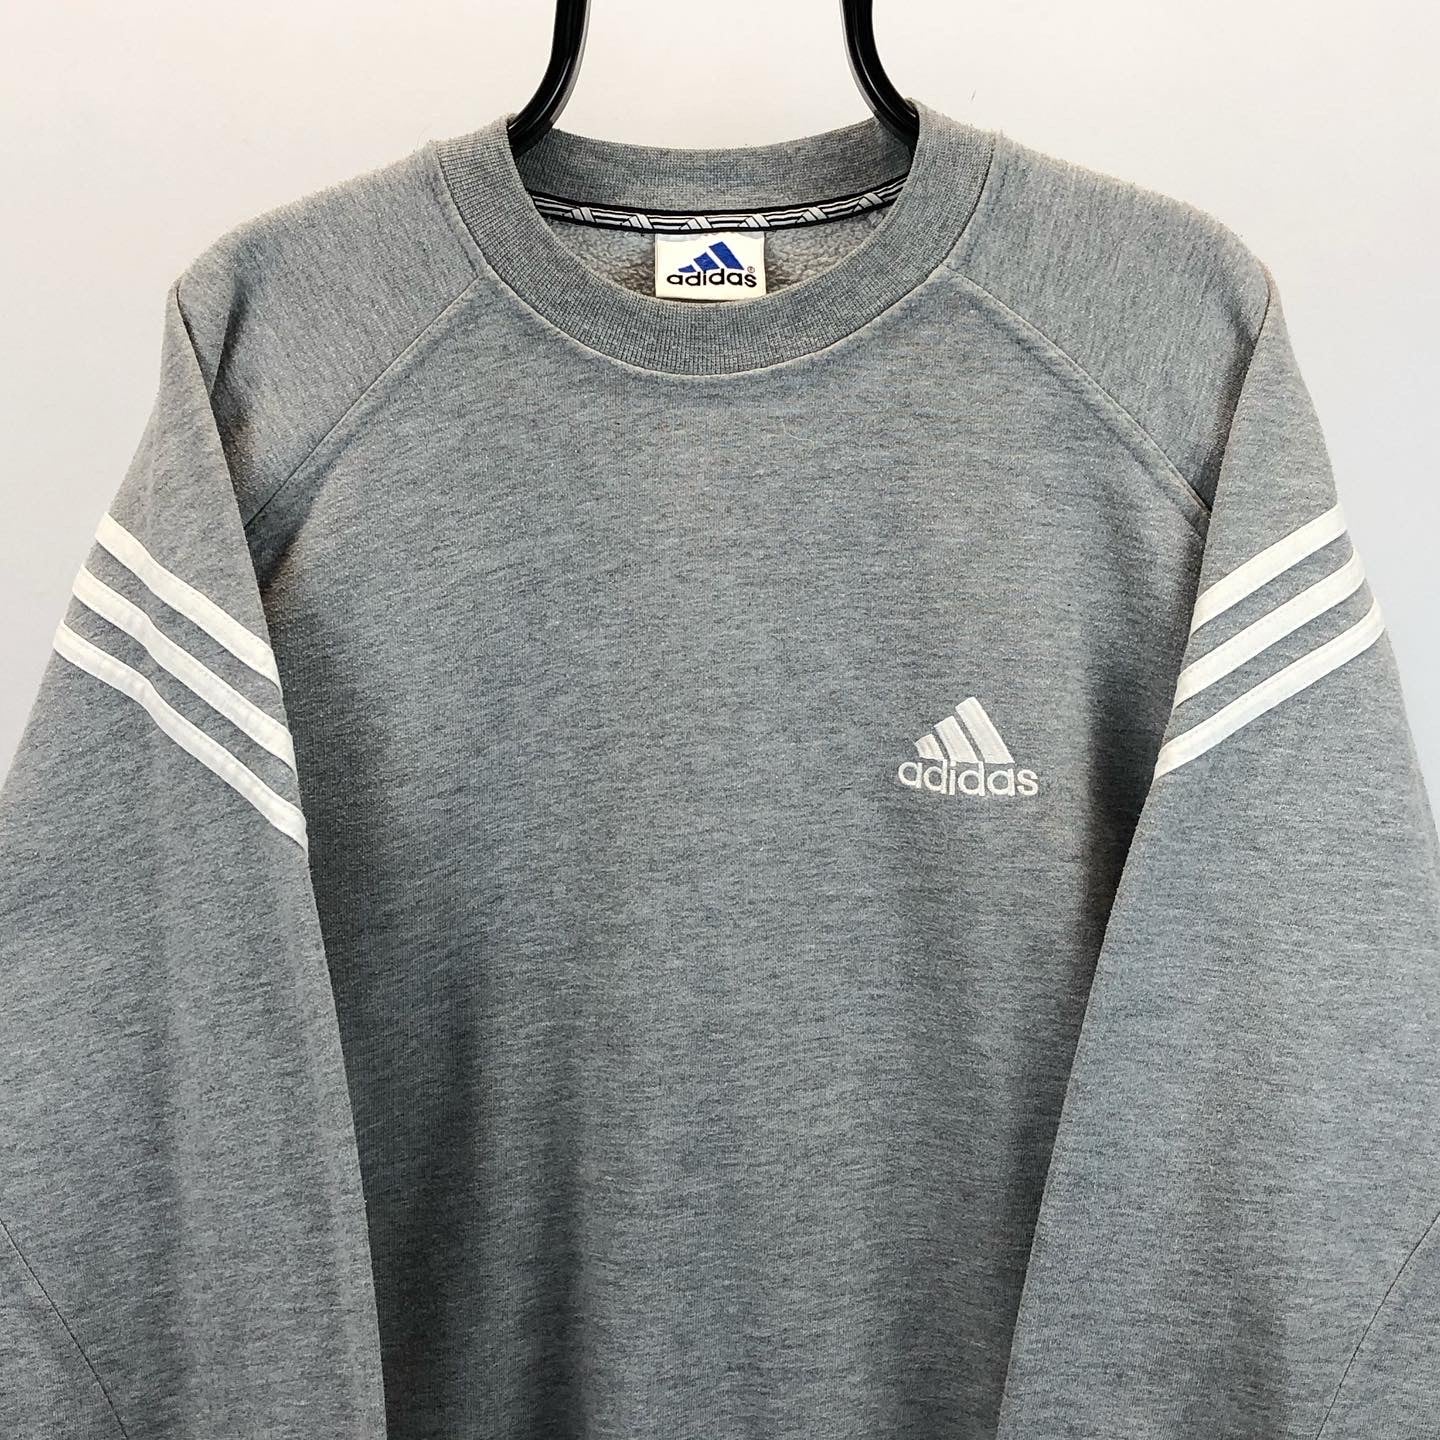 Vintage 90s Adidas Embroidered Small Logo Sweatshirt in Grey - Men's Large/Women's XL